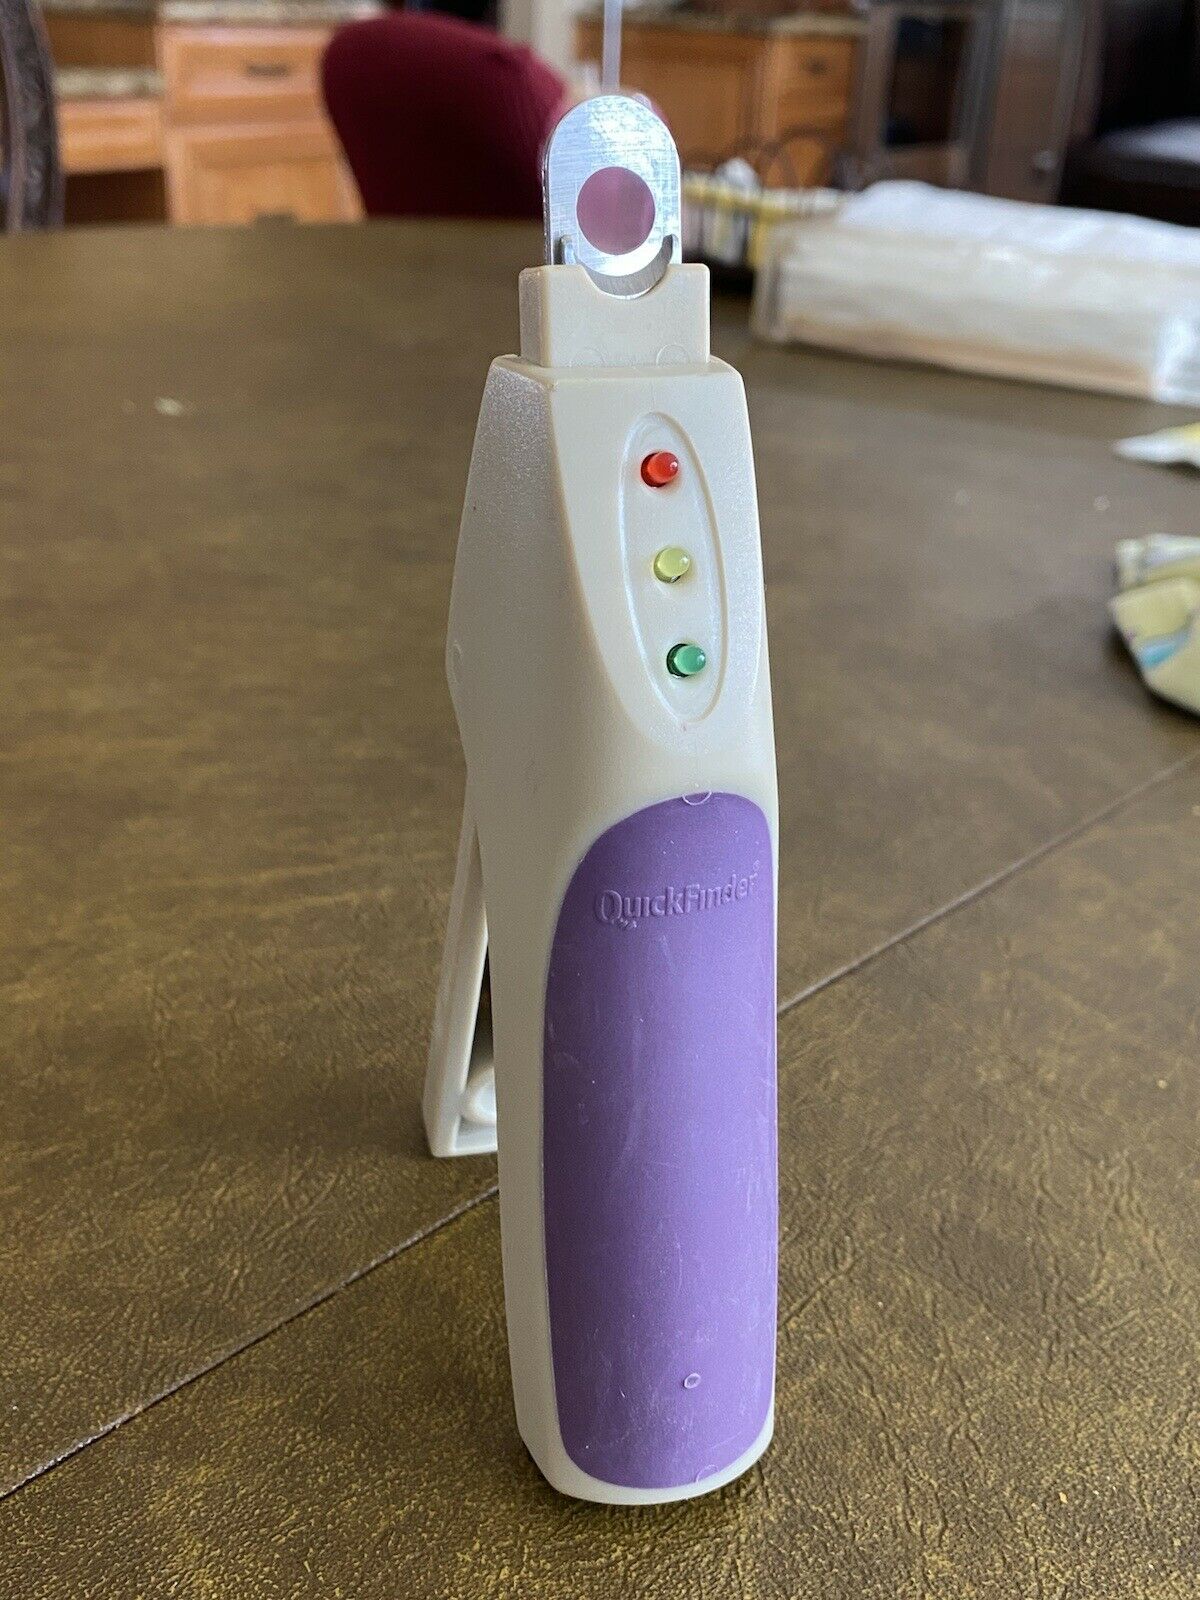 Miracle Care Purple QuickFinder Nail Trimmer for Dogs, Small Mint Condition